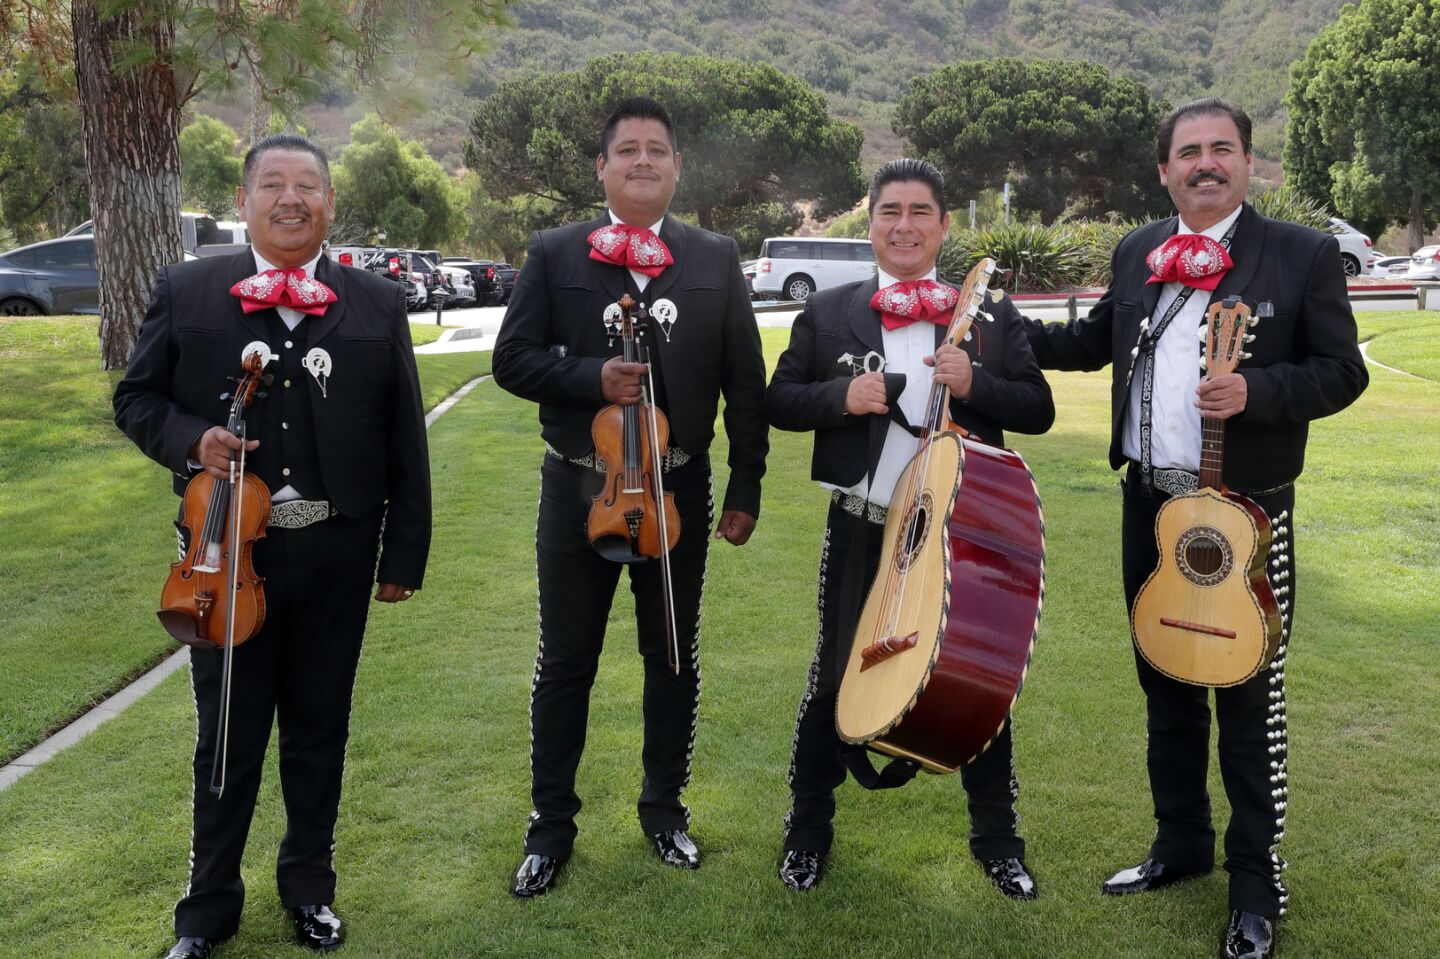 Mariachi Del Mar was on hand to entertain during check-in